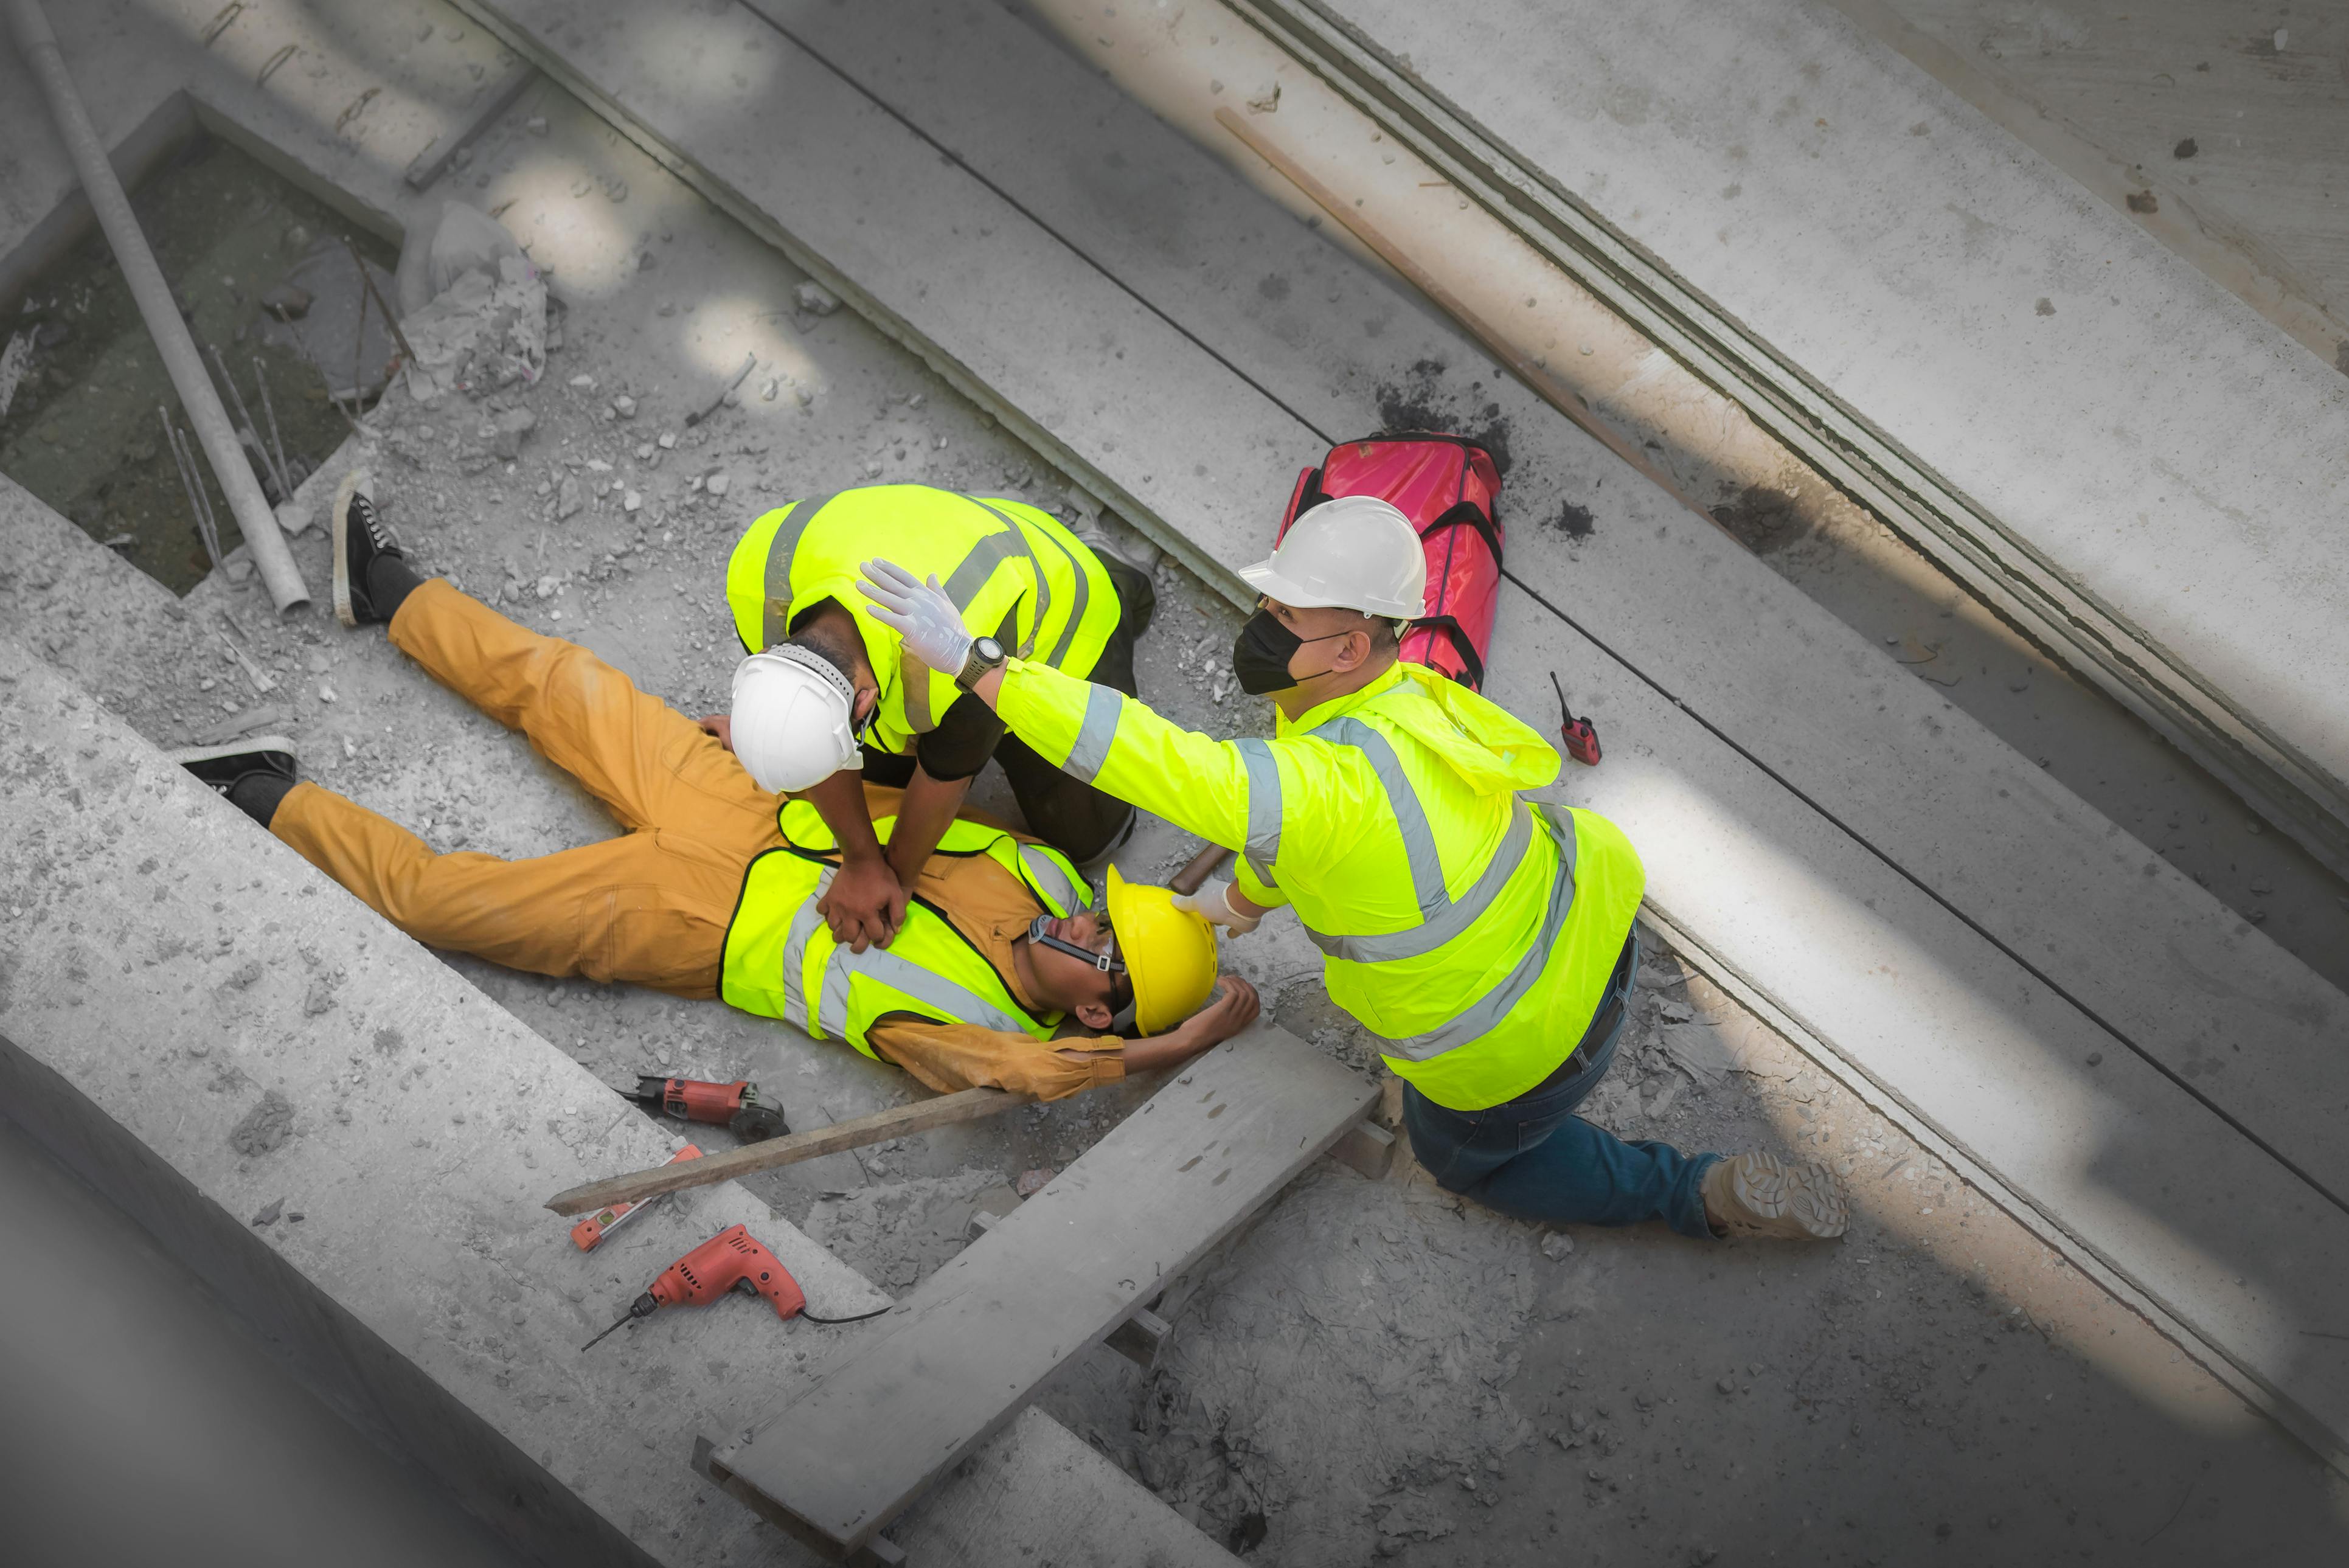 Construction worker being aided after industry